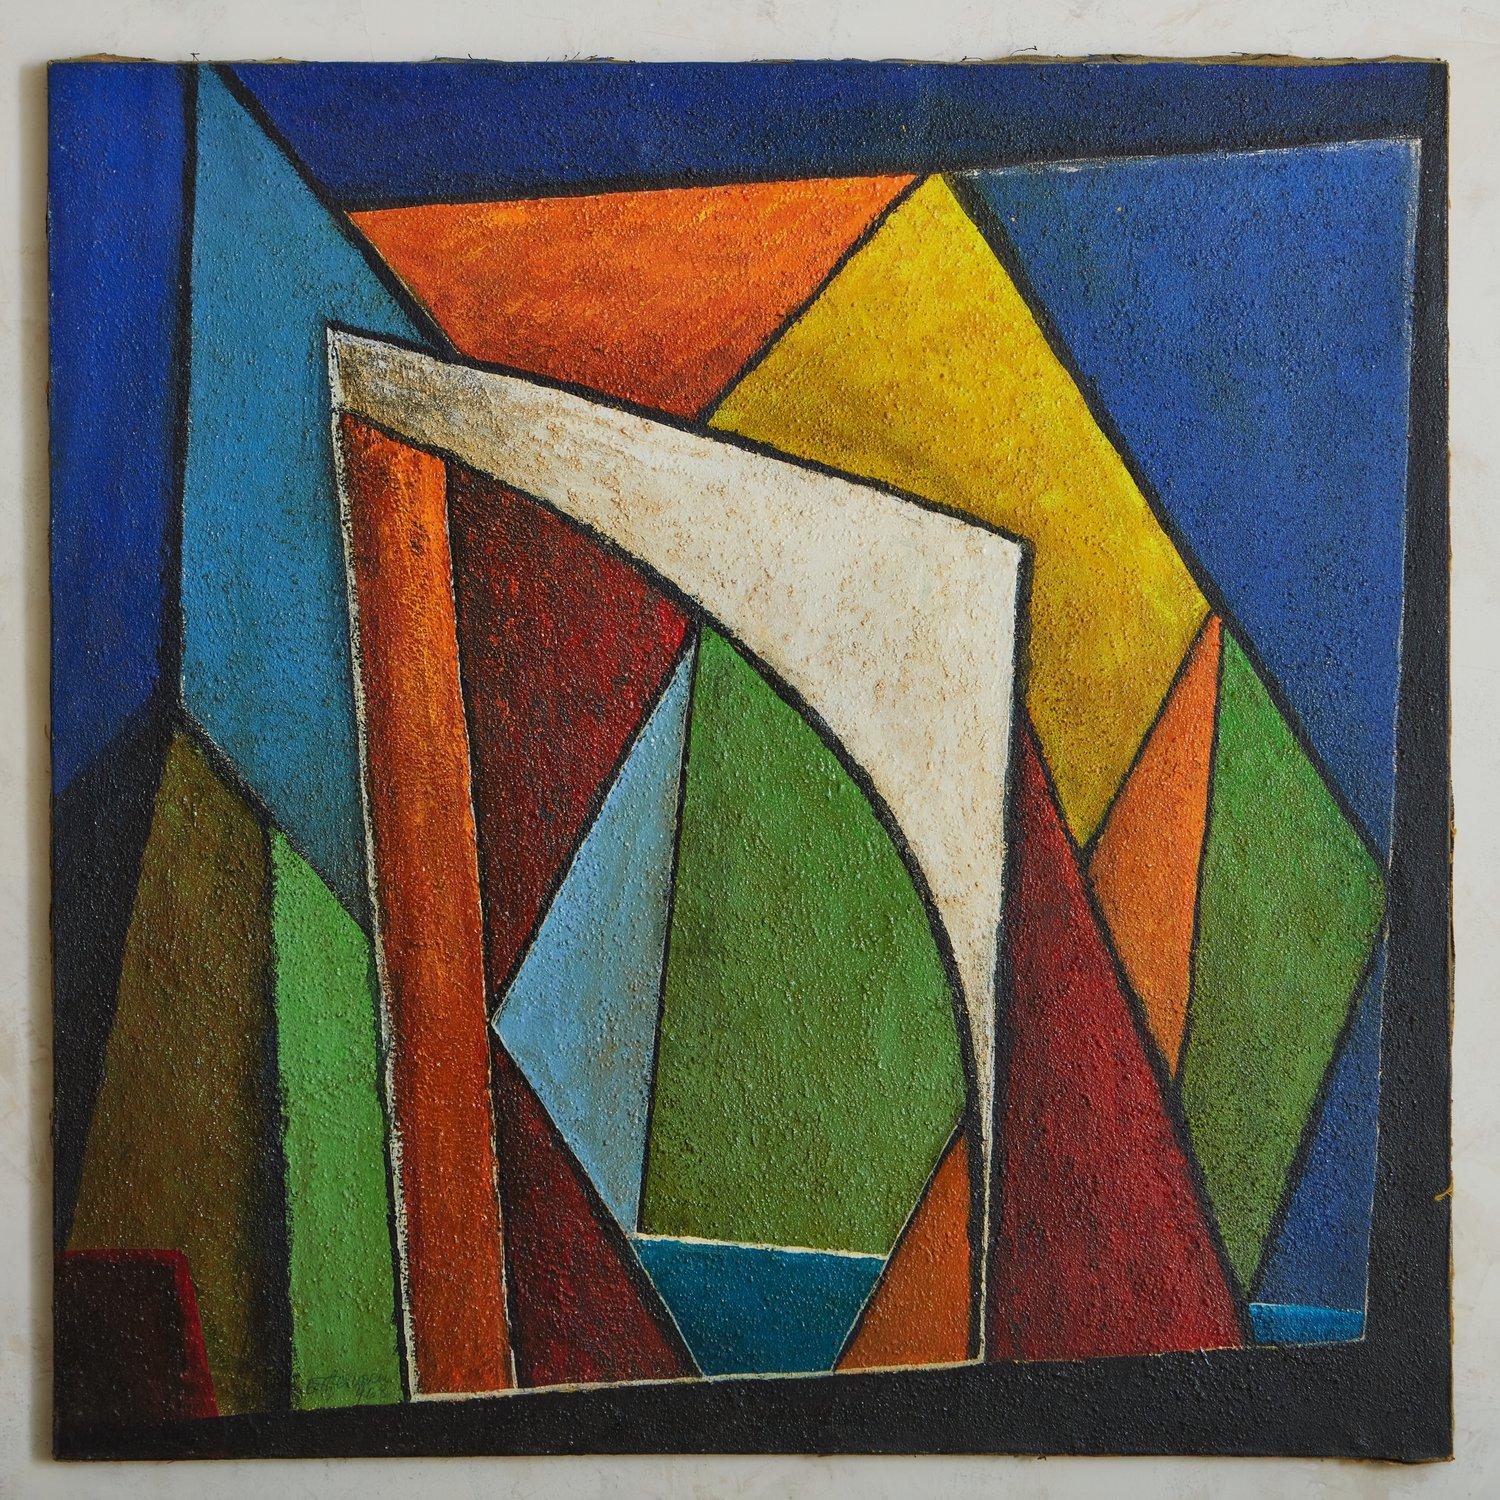 A Mid Century painting on canvas by Italian artist Attilio Ferracin (1912-1999) featuring bright, primary colors in an abstract design. Signed and dated 1970 en verso.